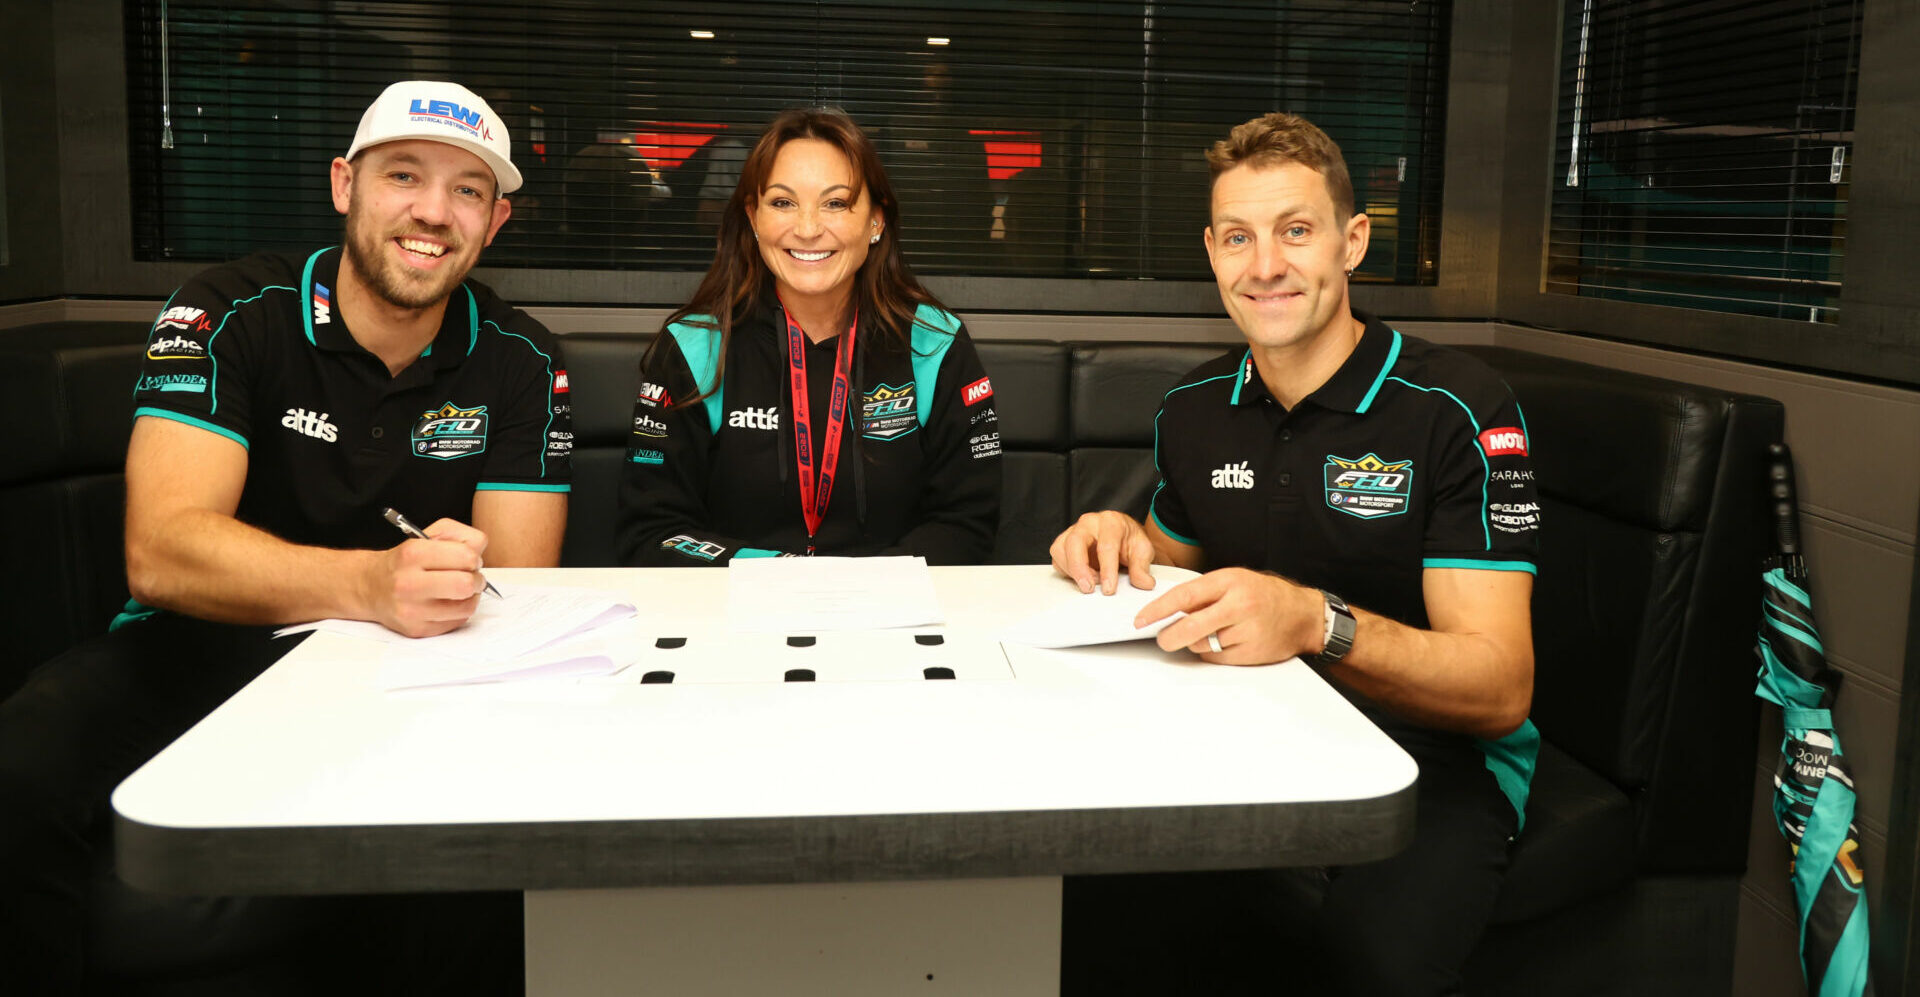 FHO Racing owner Faye Ho (center) with riders Peter Hickman (left) and Josh Brookes (right). Photo courtesy FHO Racing.